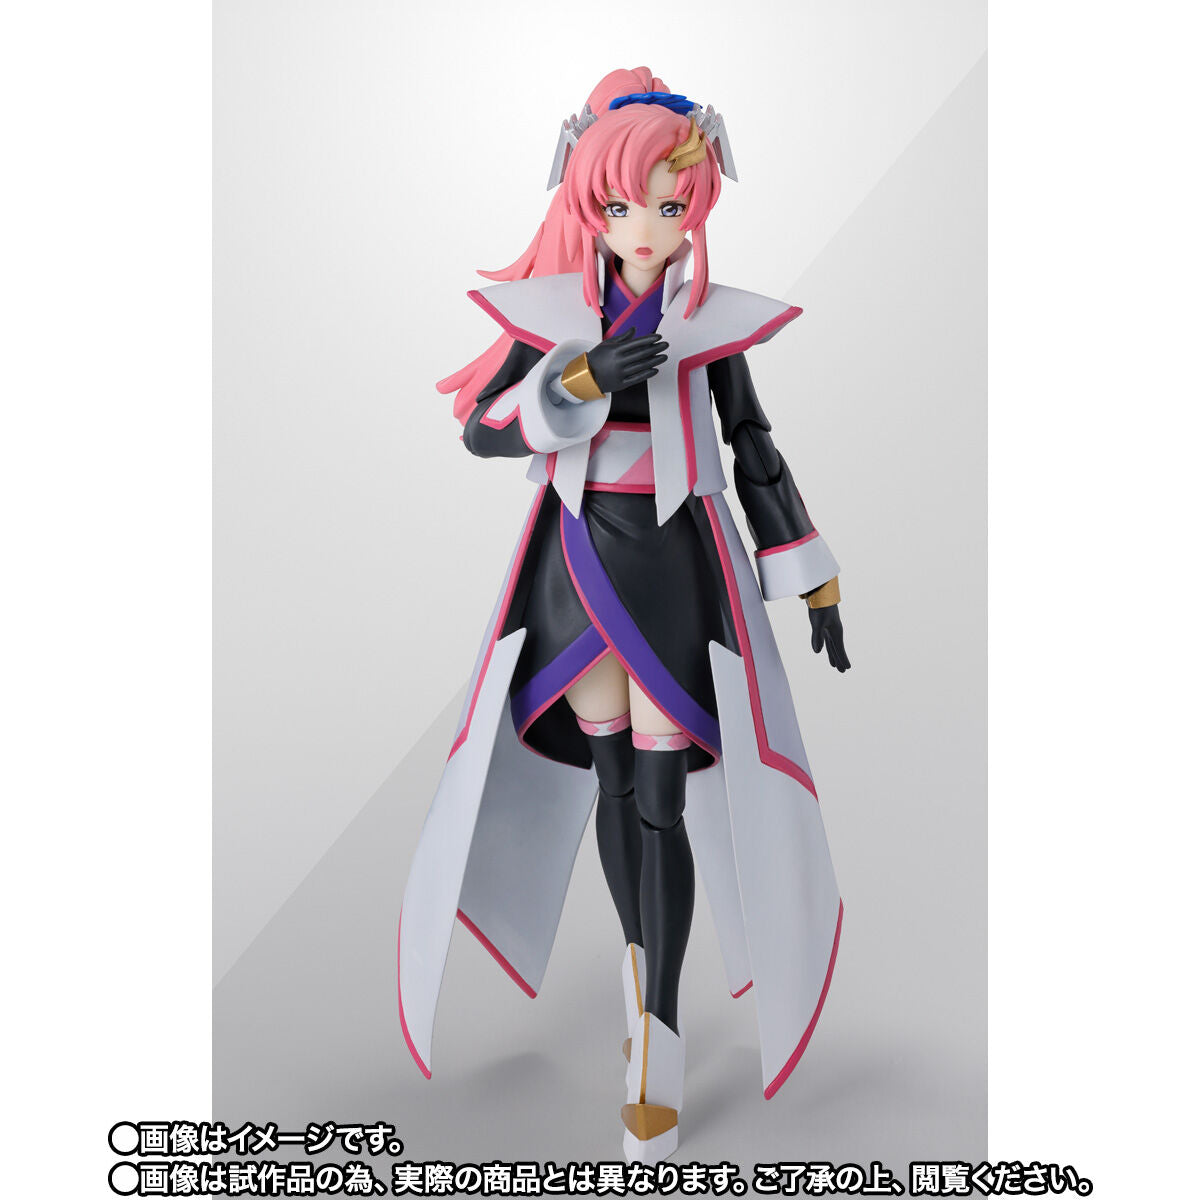 SPECIAL ORDER Bandai - S.H.Figuarts - Mobile Suit Gundam SEED Freedom - Lacus Clyne: Compass Battle Surcoat Ver. [EXCLUSIVE] [JP]